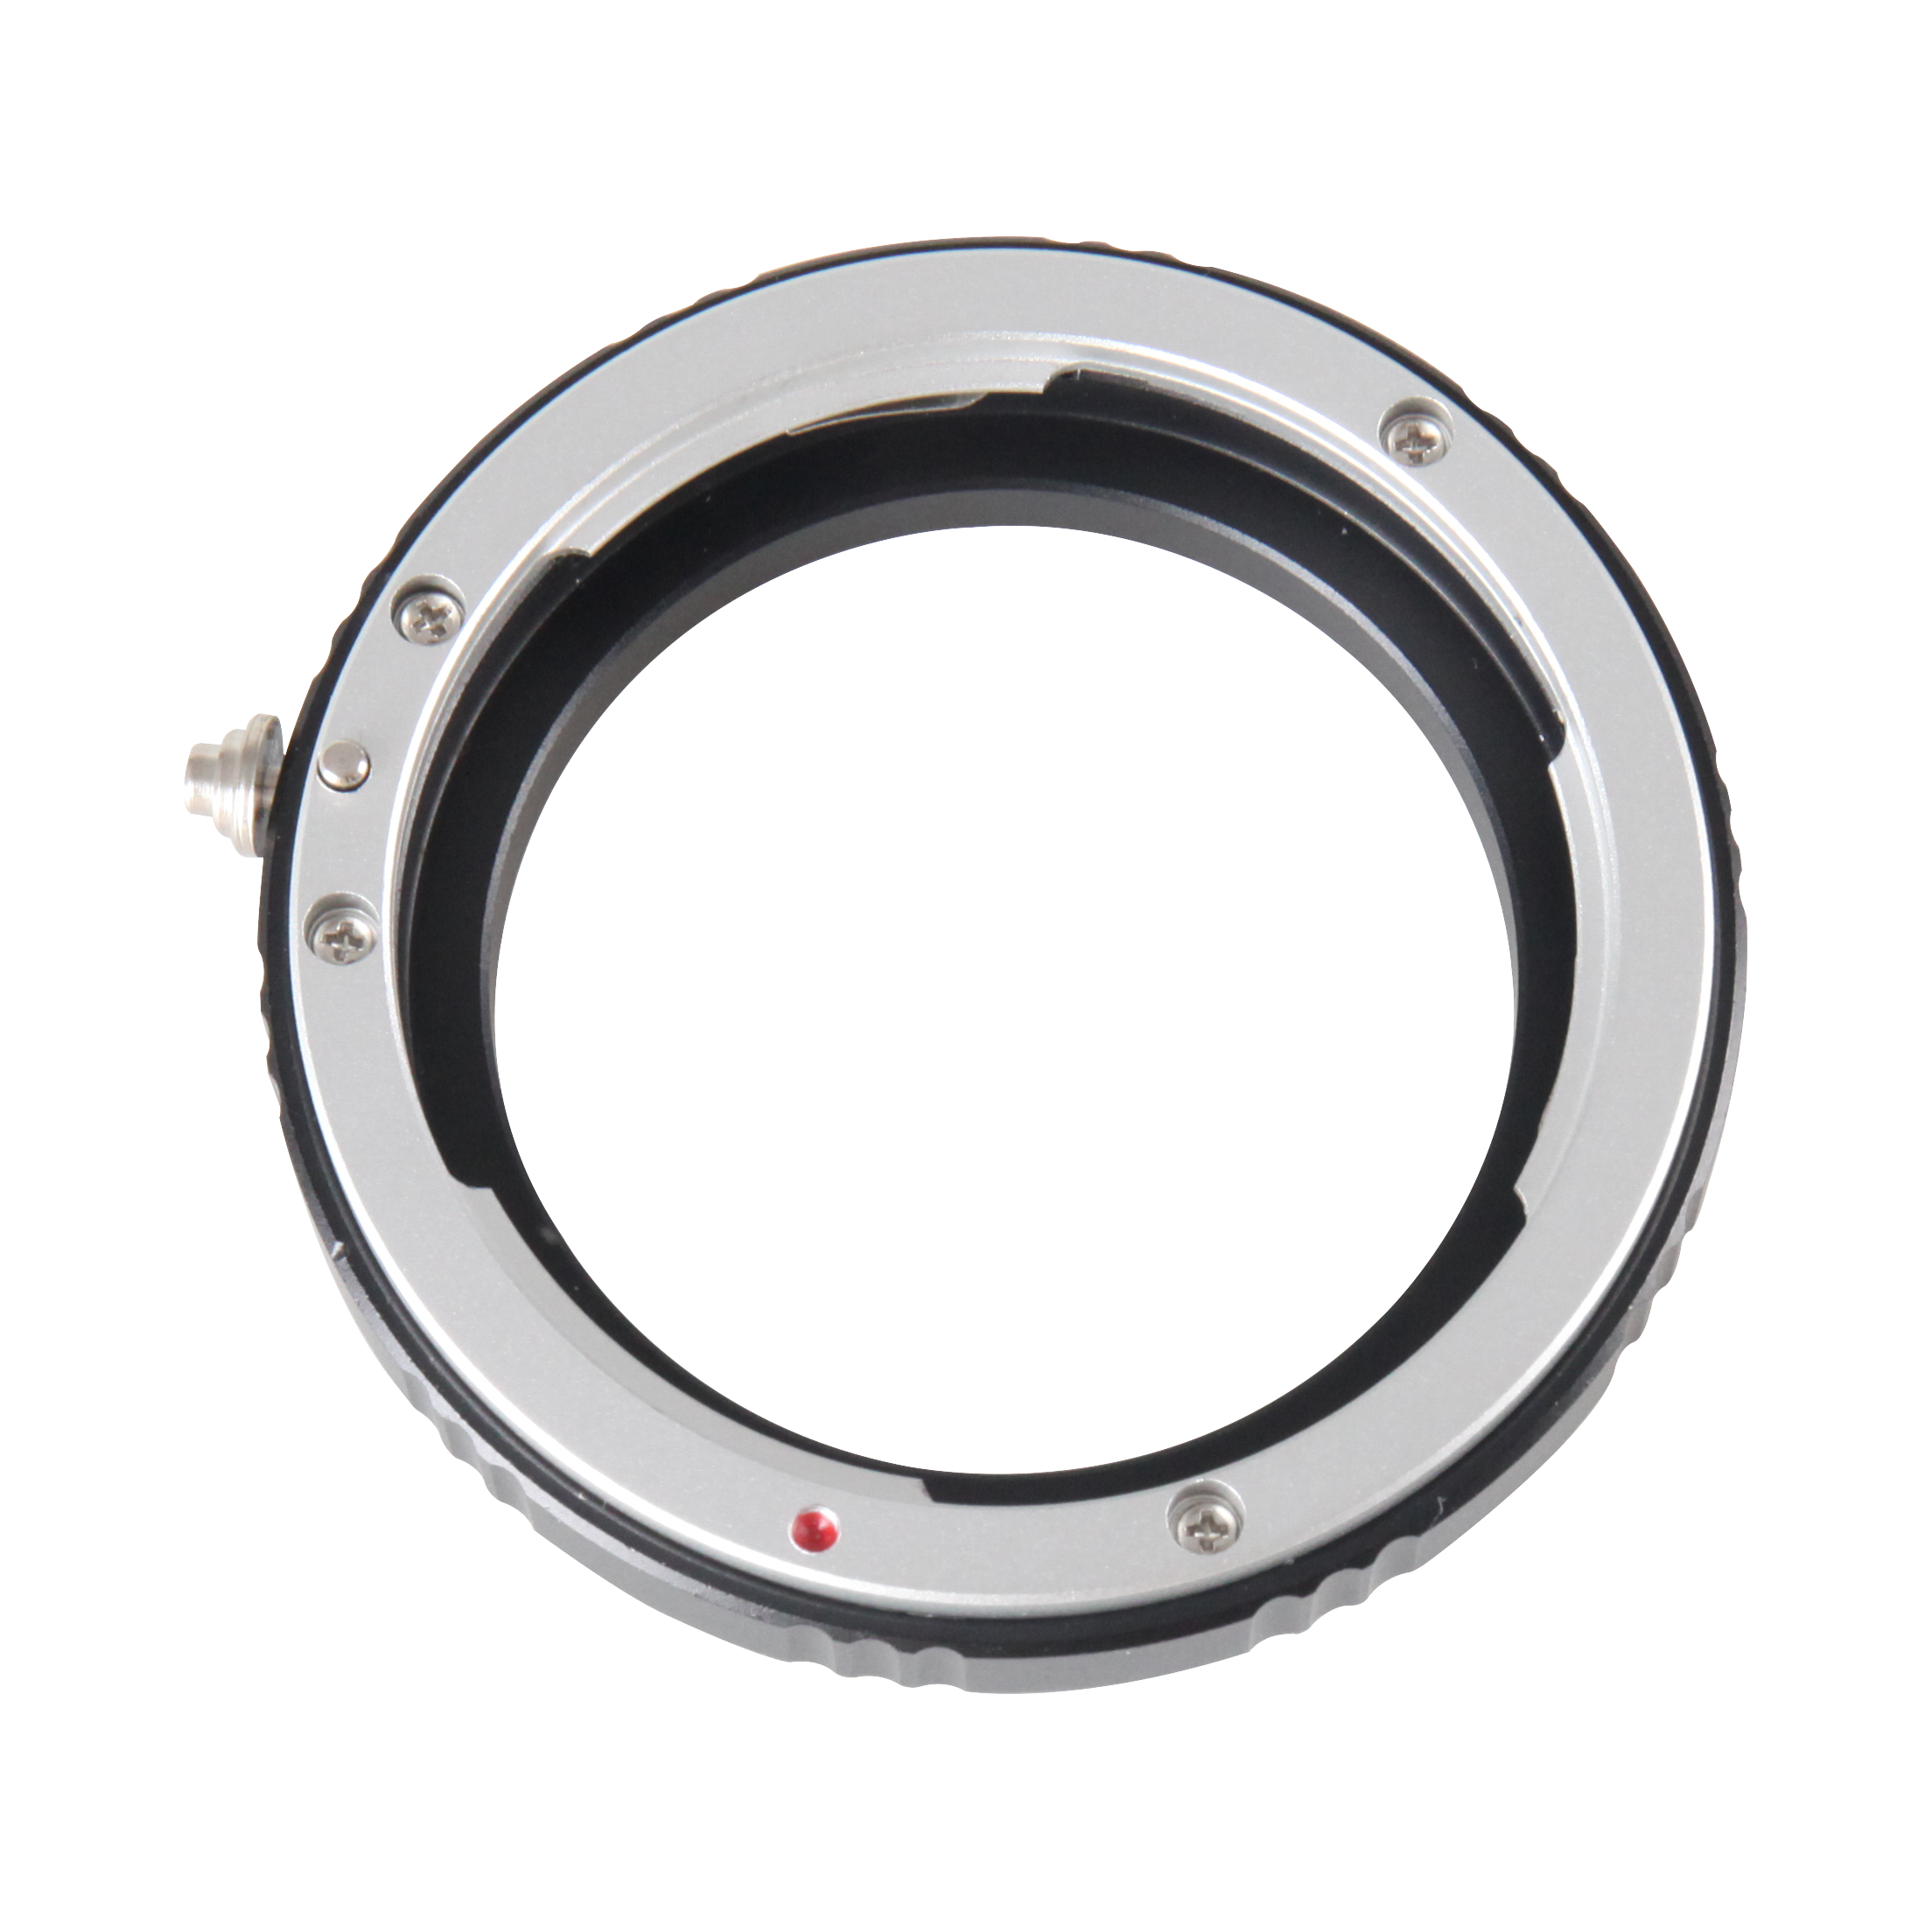 Lens Adapter Ring for Canon EF-Mount Optical Snoot II - CLEARANCE